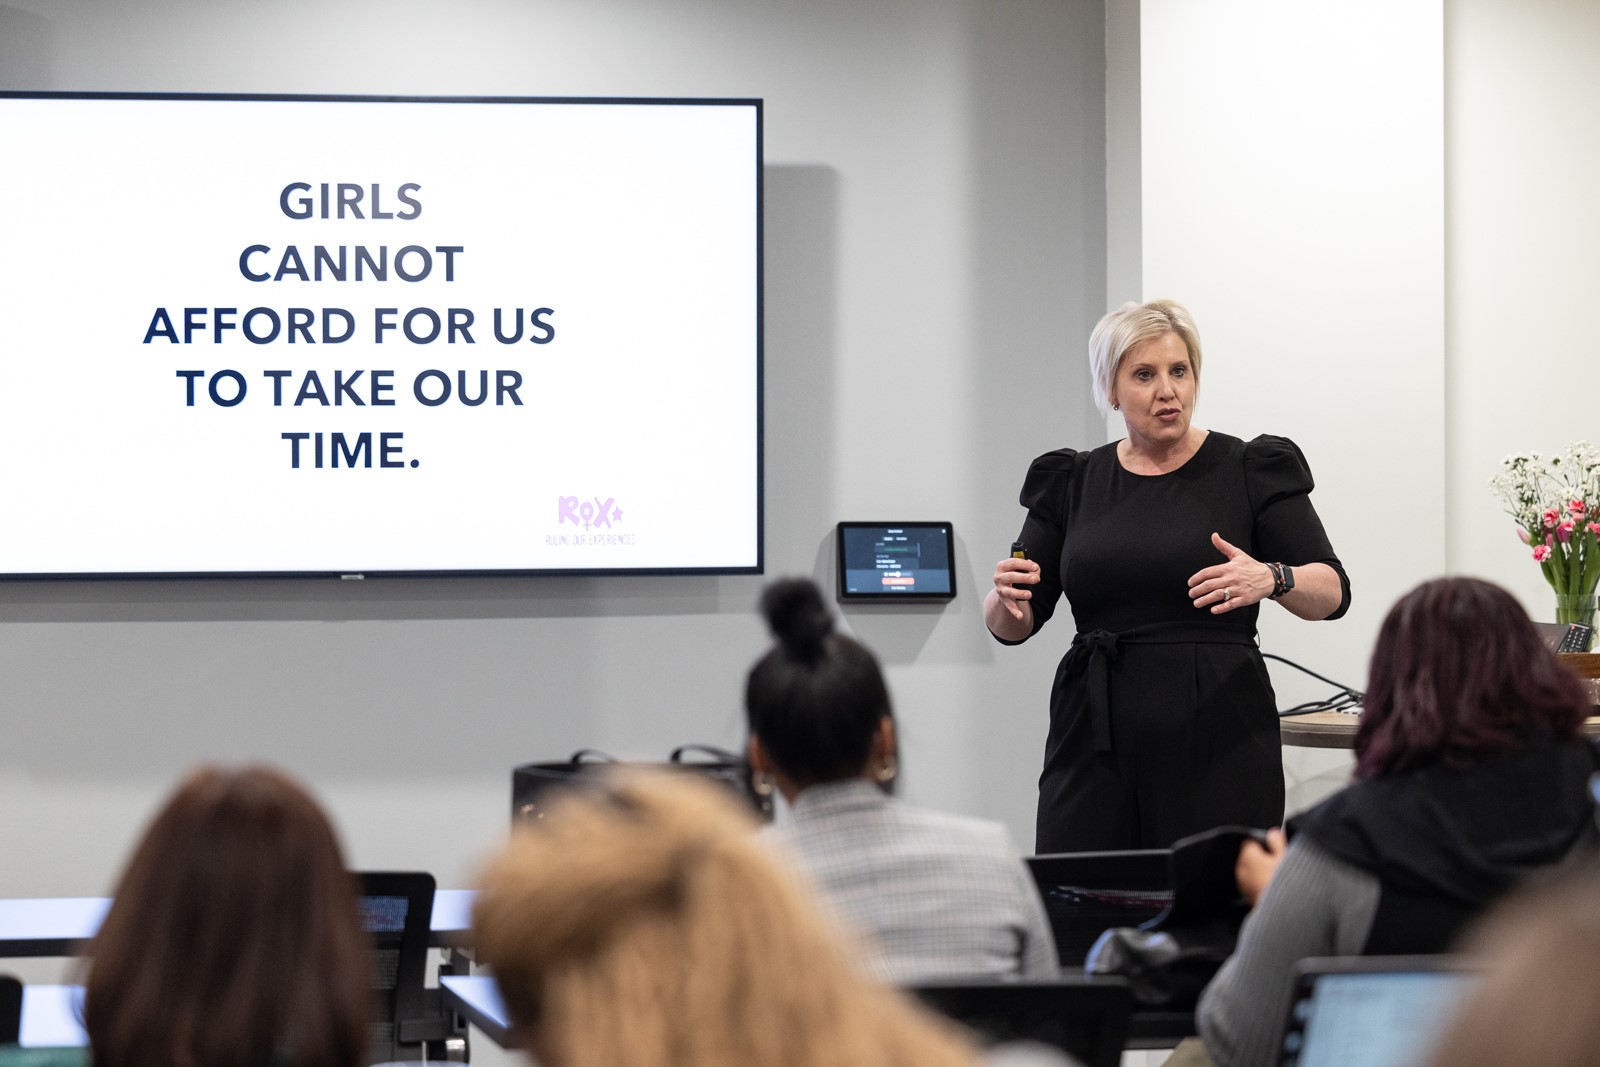 Dr. Lisa Hinkelman, founder and CEO of ROX, speaks The Girls Are Not OK event on March 26 in Columbus, Ohio